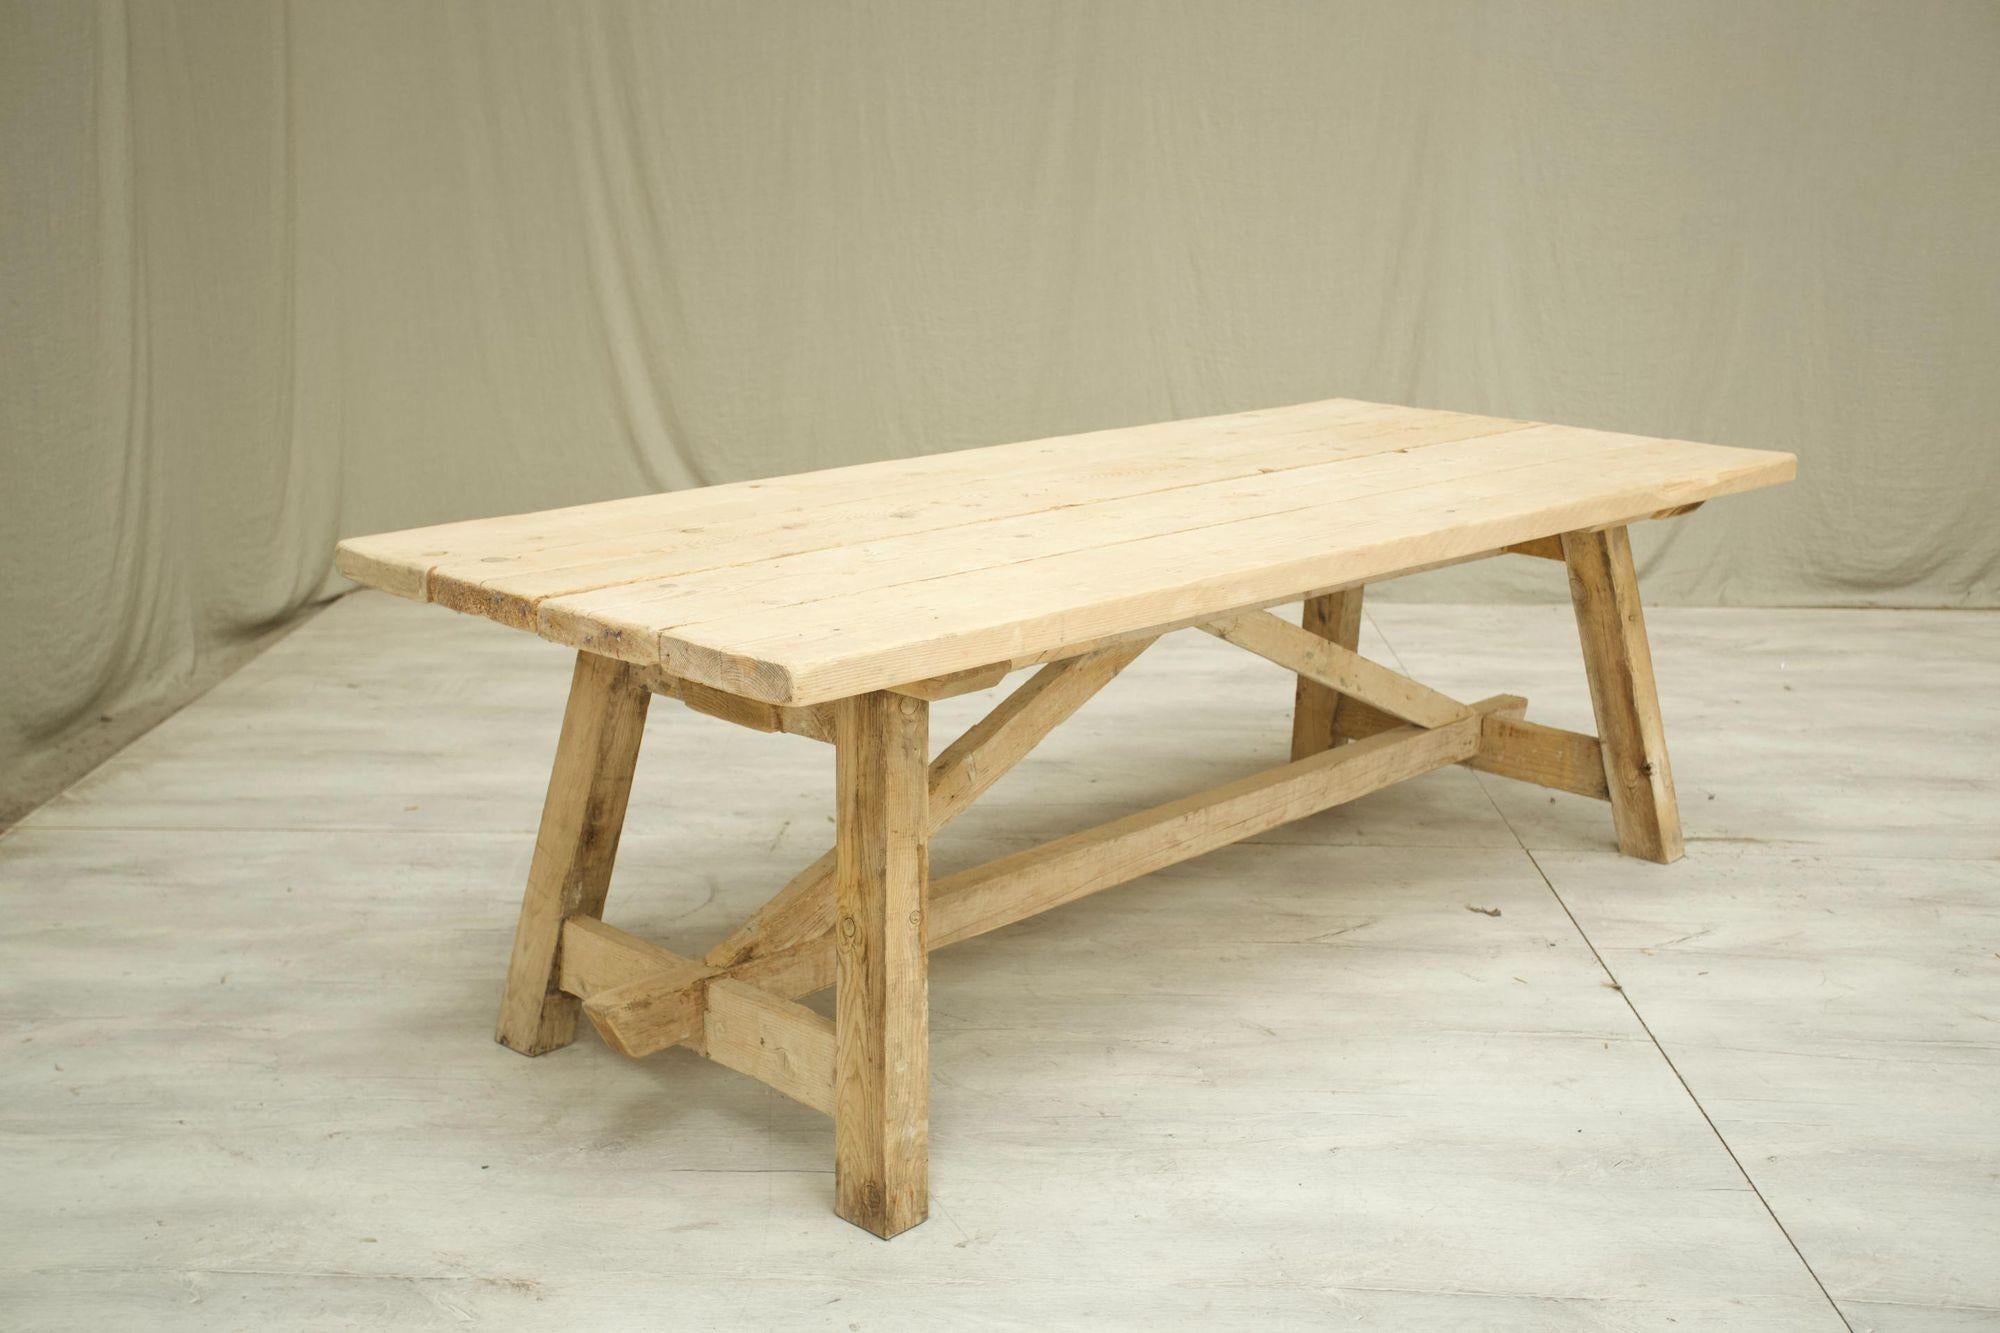 These are the latest designs of our bespoke dining table range. We have these made in the South of France by a talented crafts man who uses thick period reclaimed pine floorboards to create these rather stunning and rustic dining tables.
 
We can